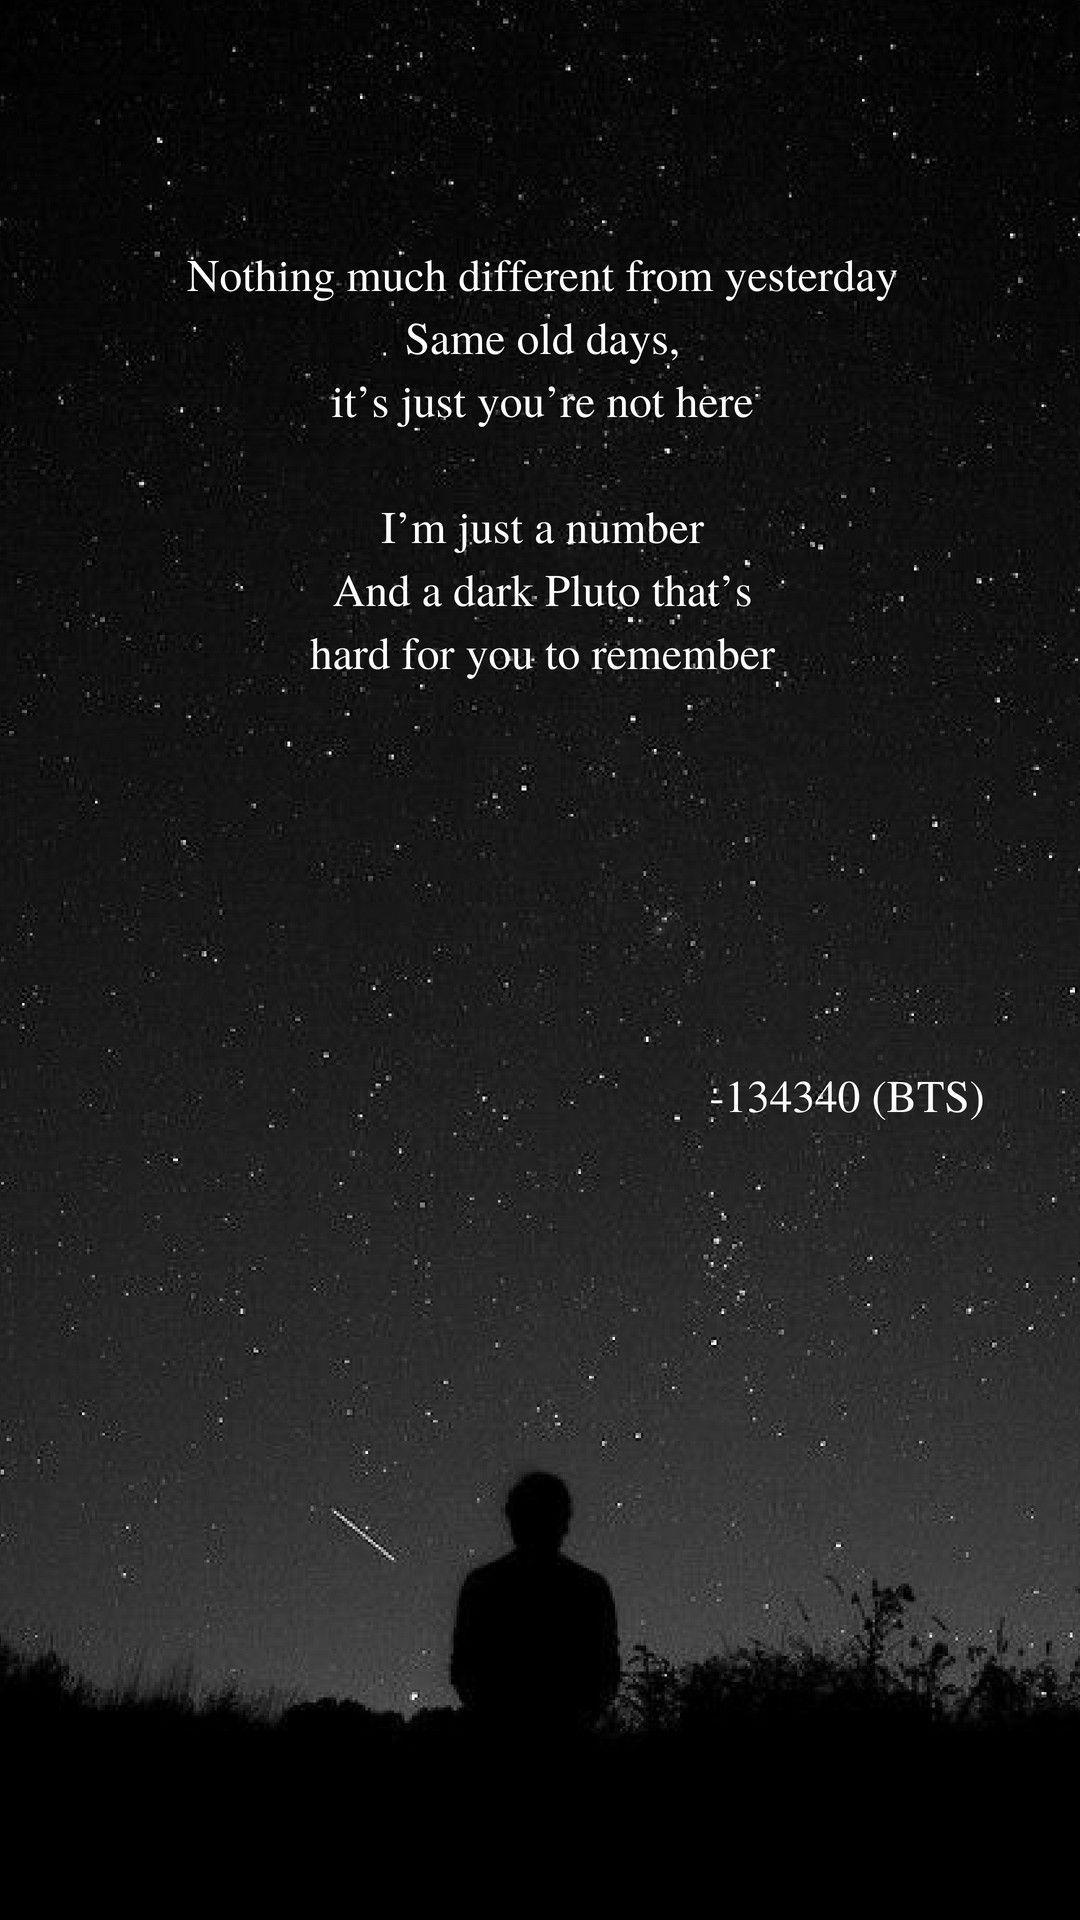 ONEULBAME on Twitter V WALLPAPER with quotewithout Requested on Tumblr   Requests are OPEN ask me anything   BTSwallpaper BTS 태형 김태형   nunaV httpstcoMMXsNDEdKu  Twitter